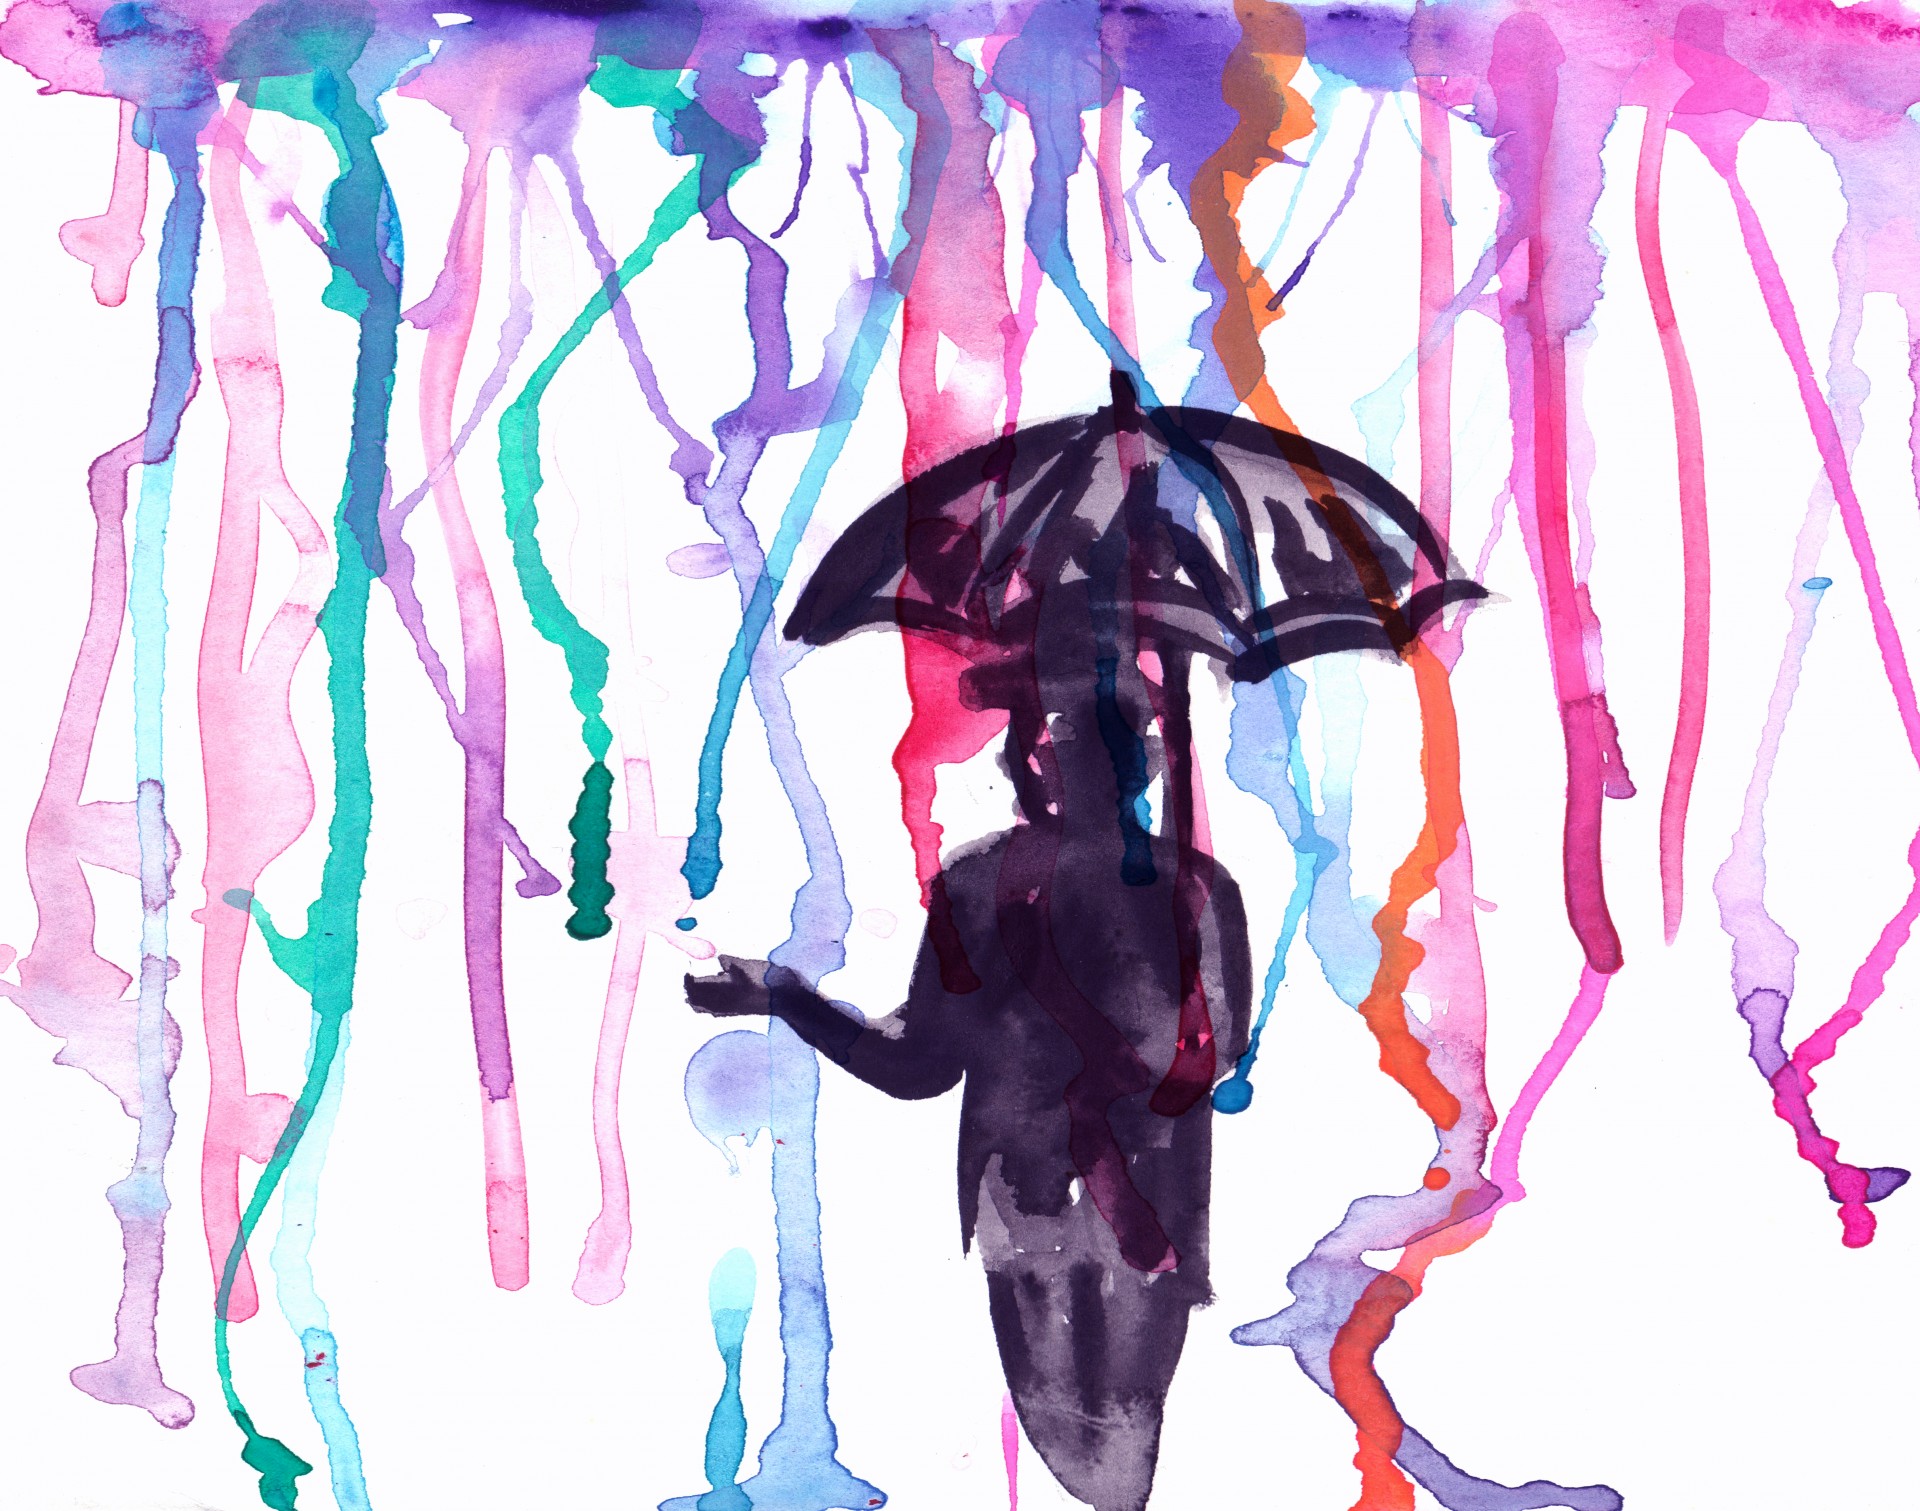 Watercolor painting of a man standing in a rainfall of colorful watercolor paints.